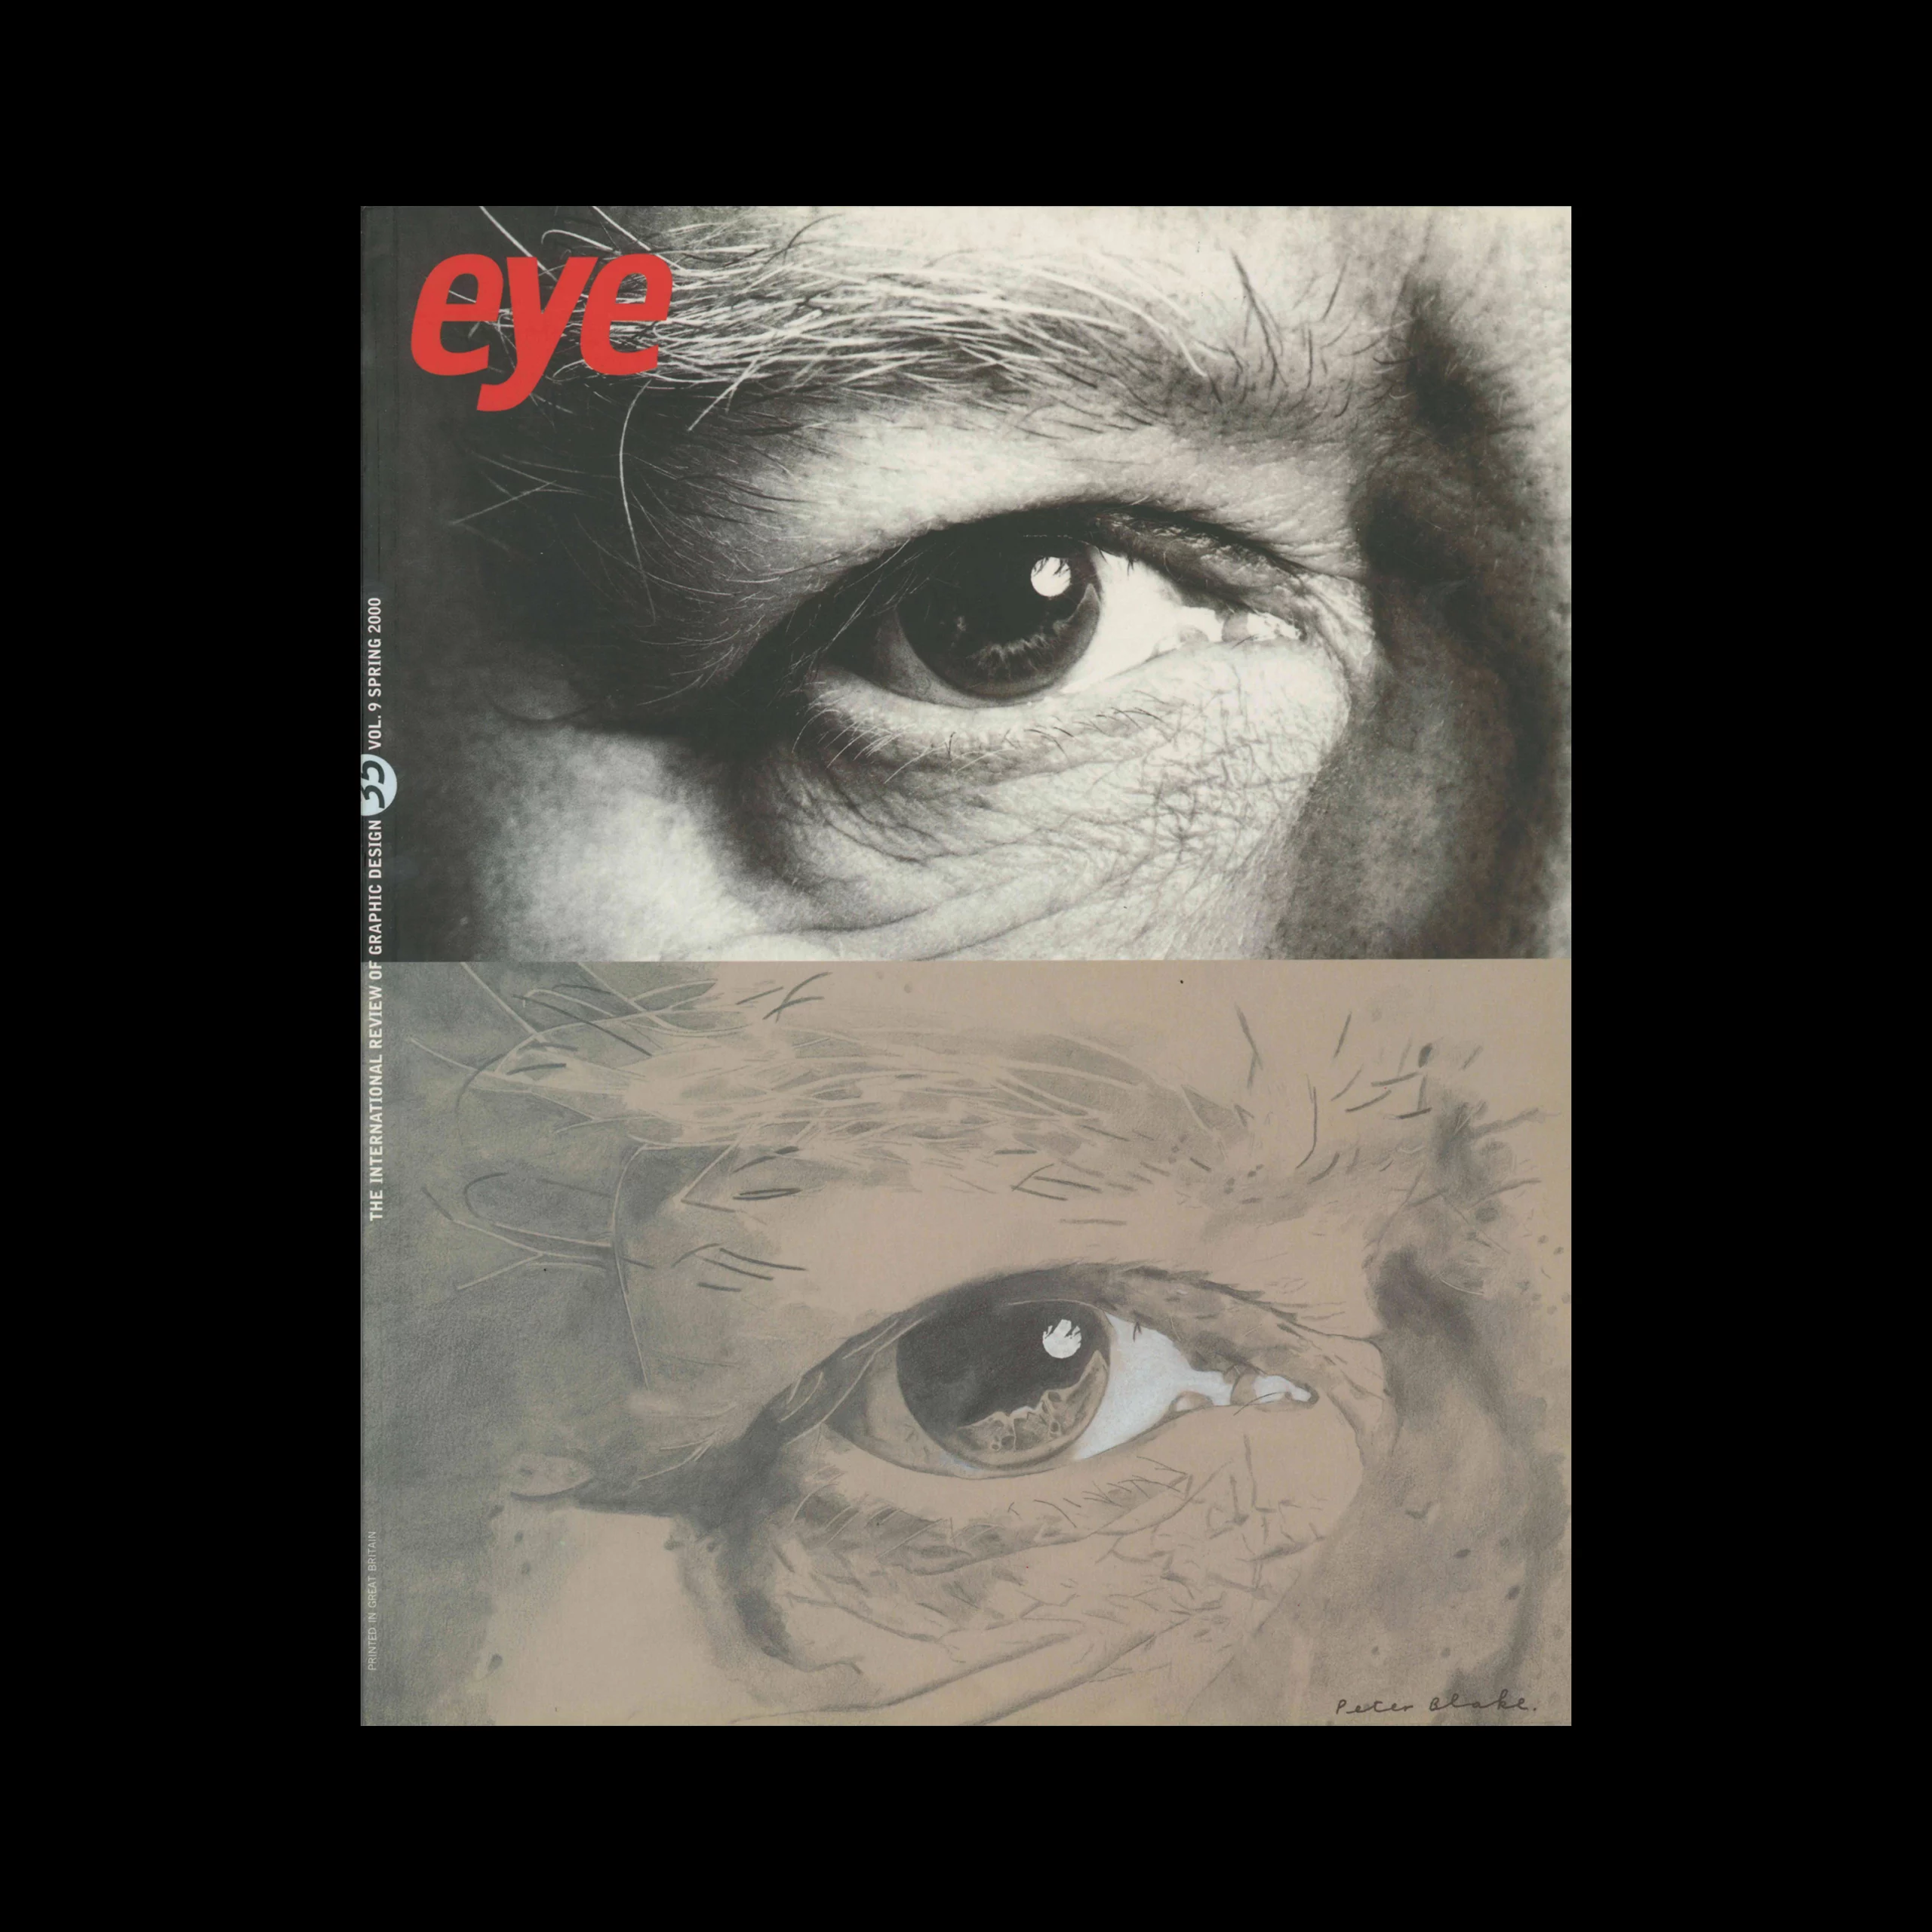 Eye, Issue 035, Sping 2000